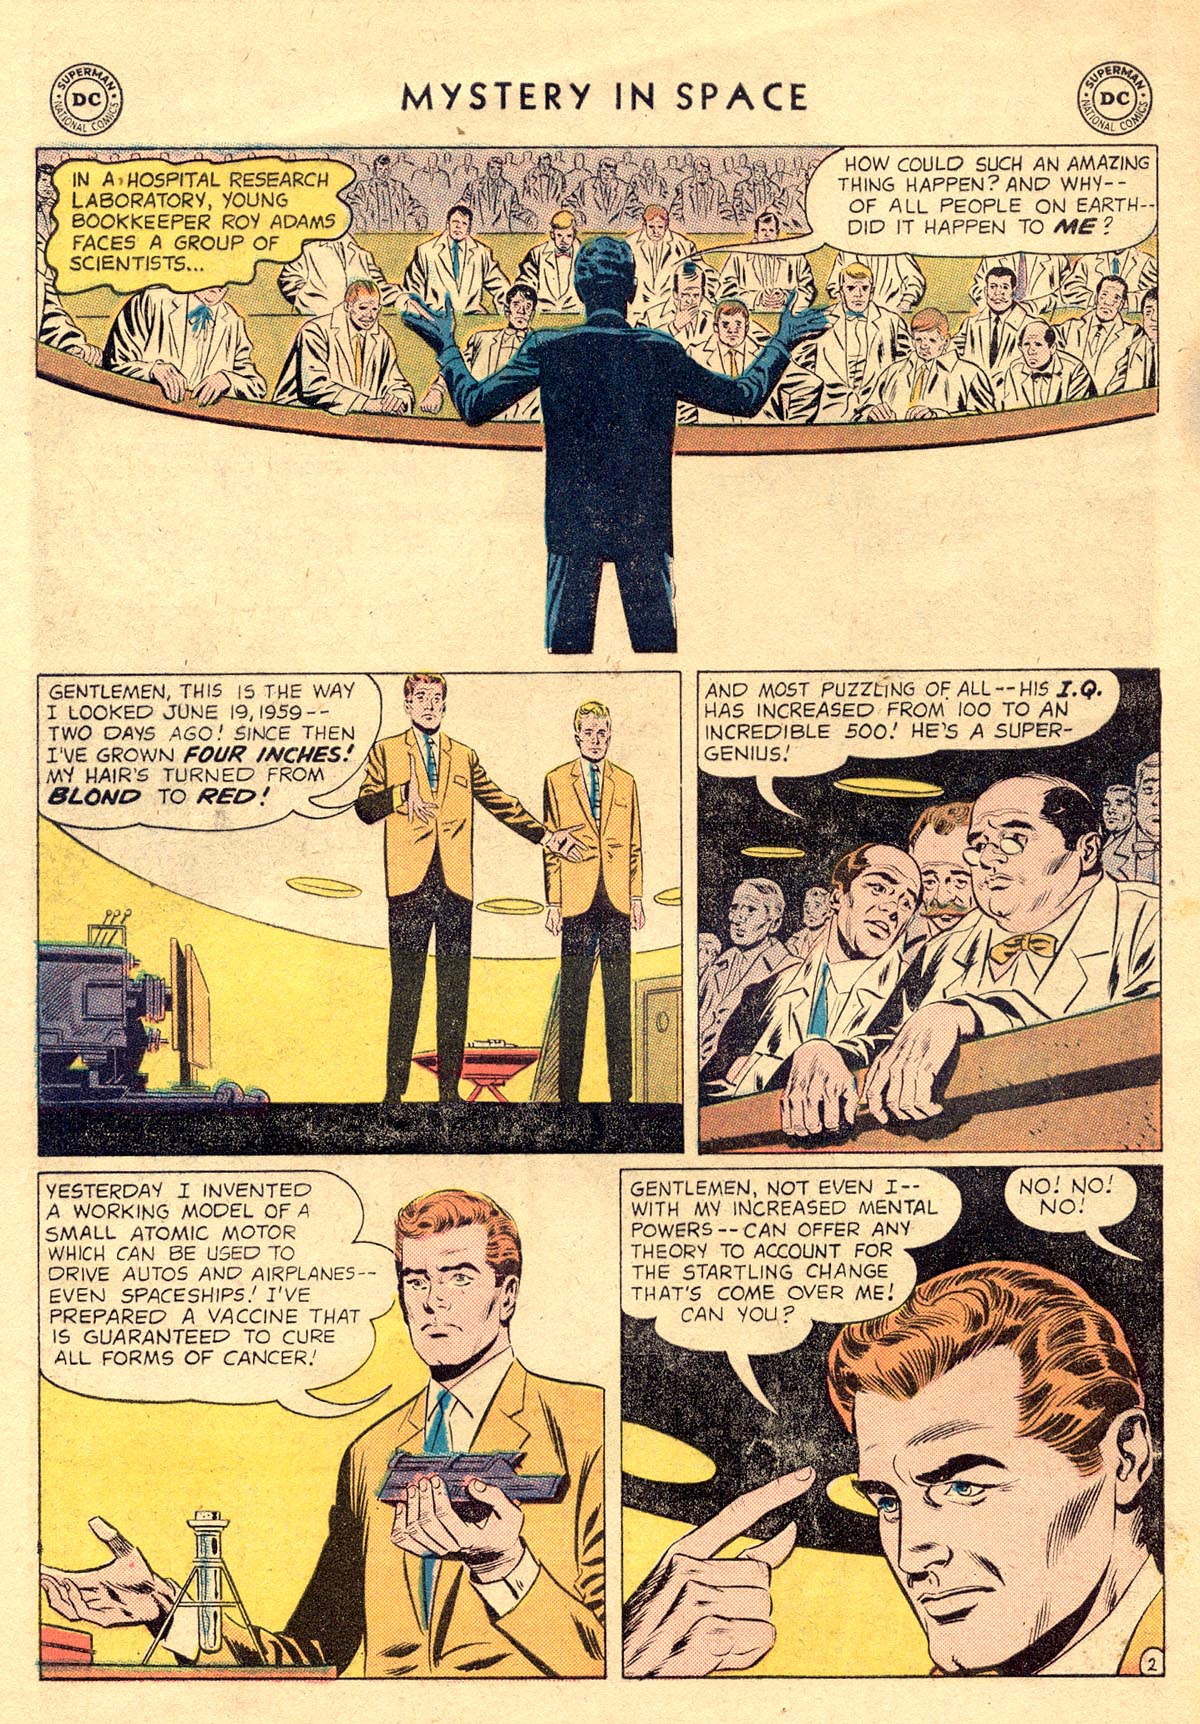 Mystery in Space (1951) 46 Page 3